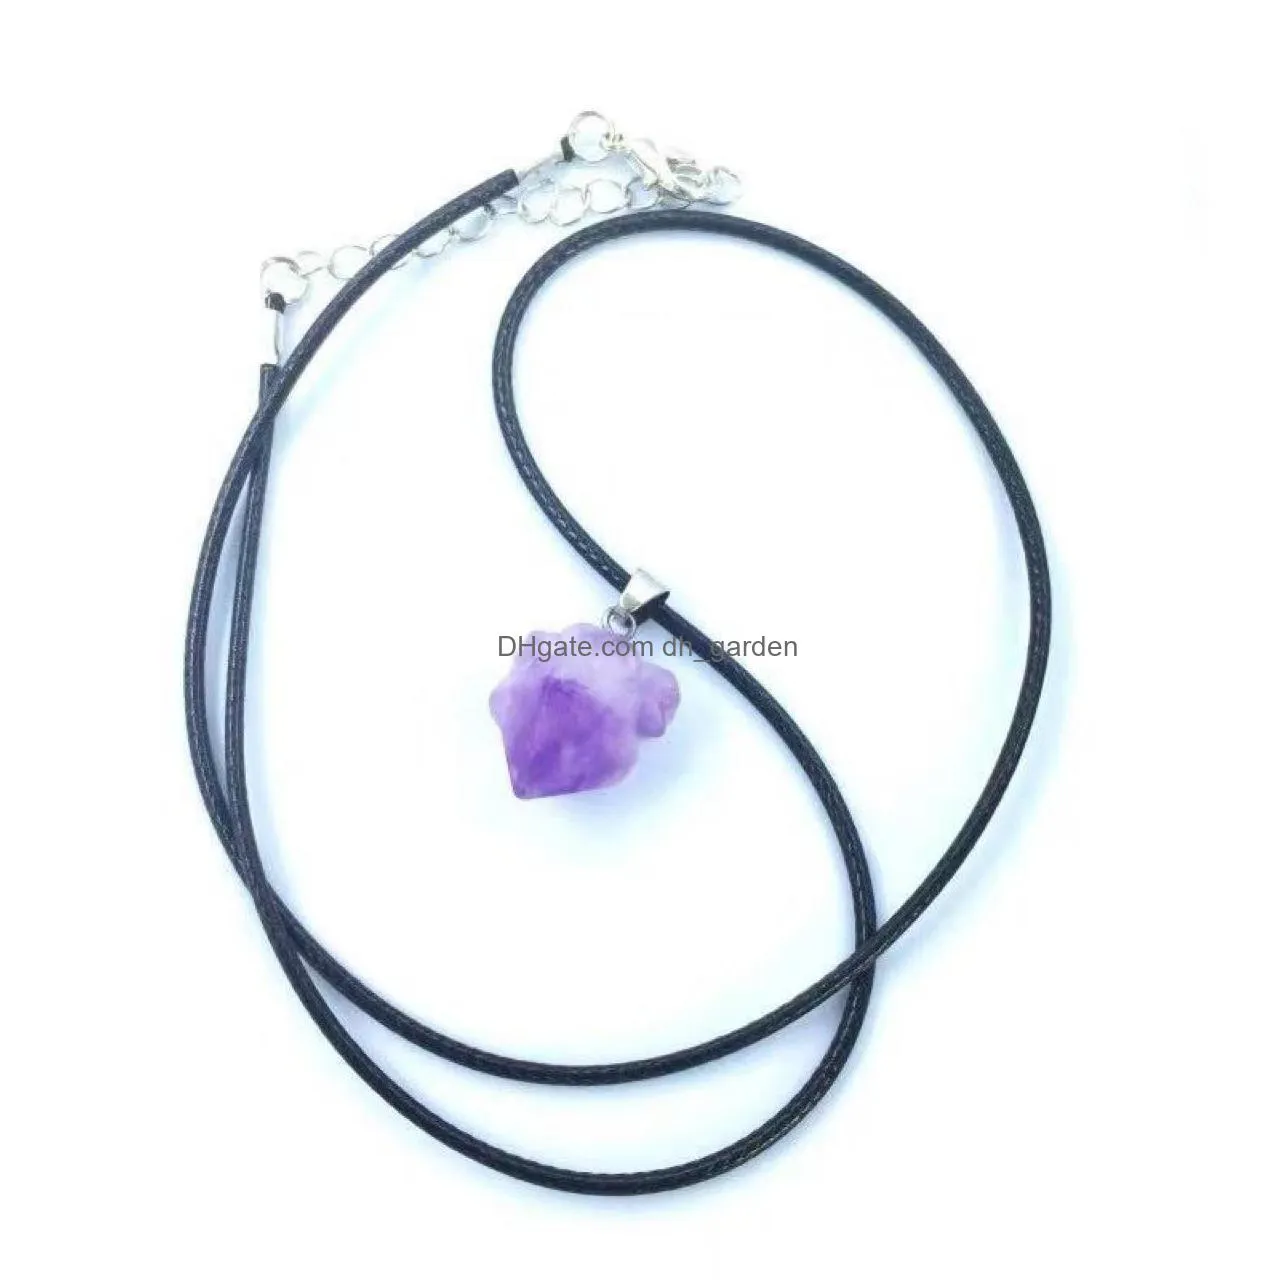 bulk natural yellow crystal stone charms amethyst irregular shape pendants for necklace earrings jewelry making